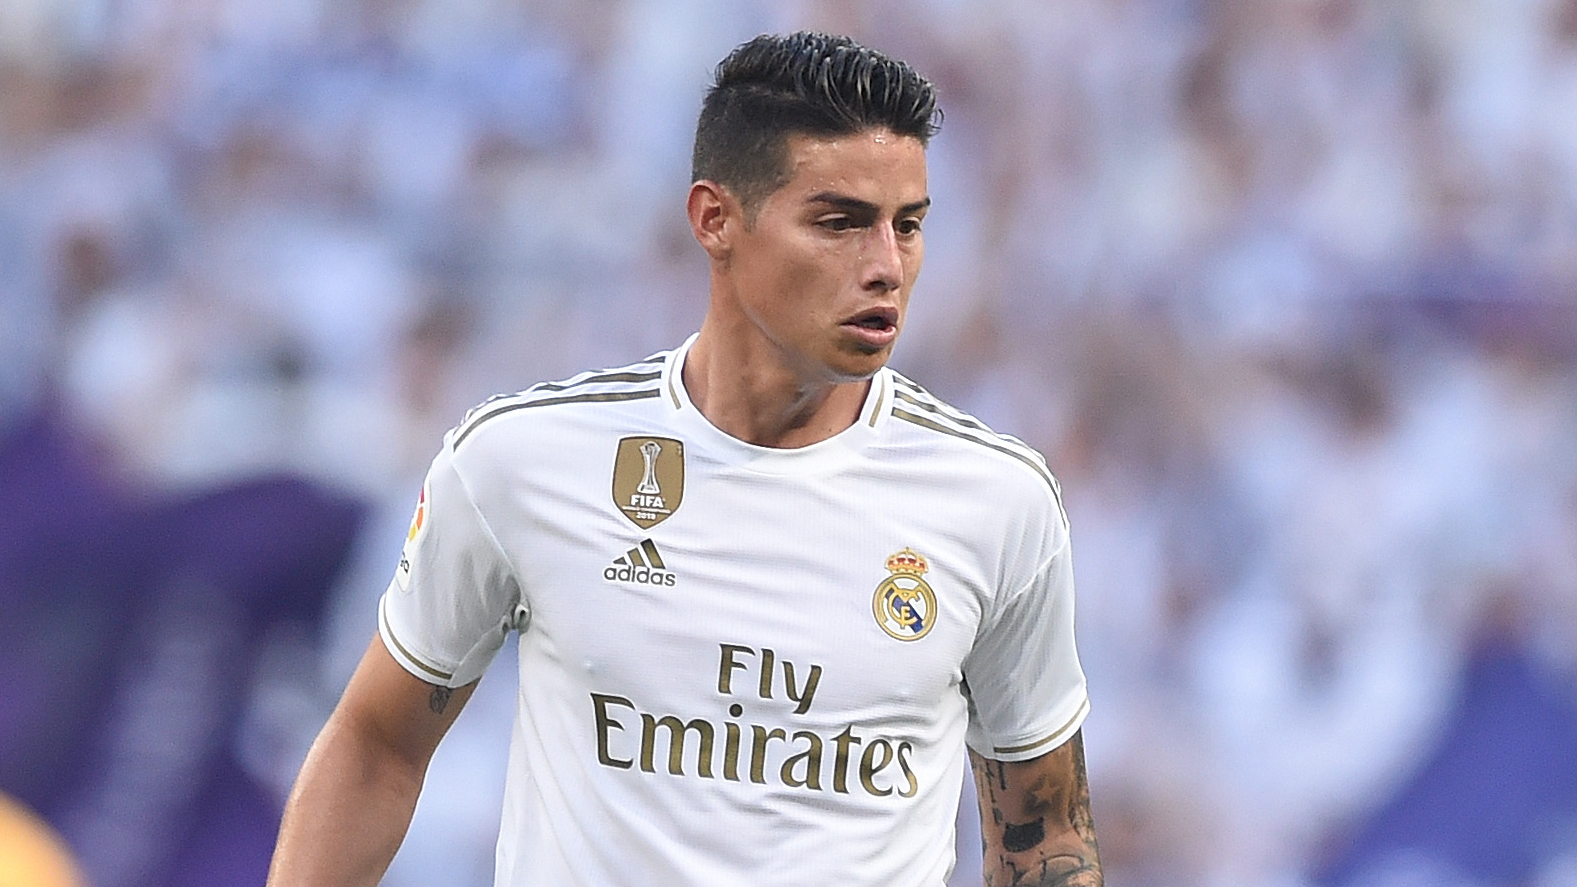 james rodriguez jersey number real madrid 2019